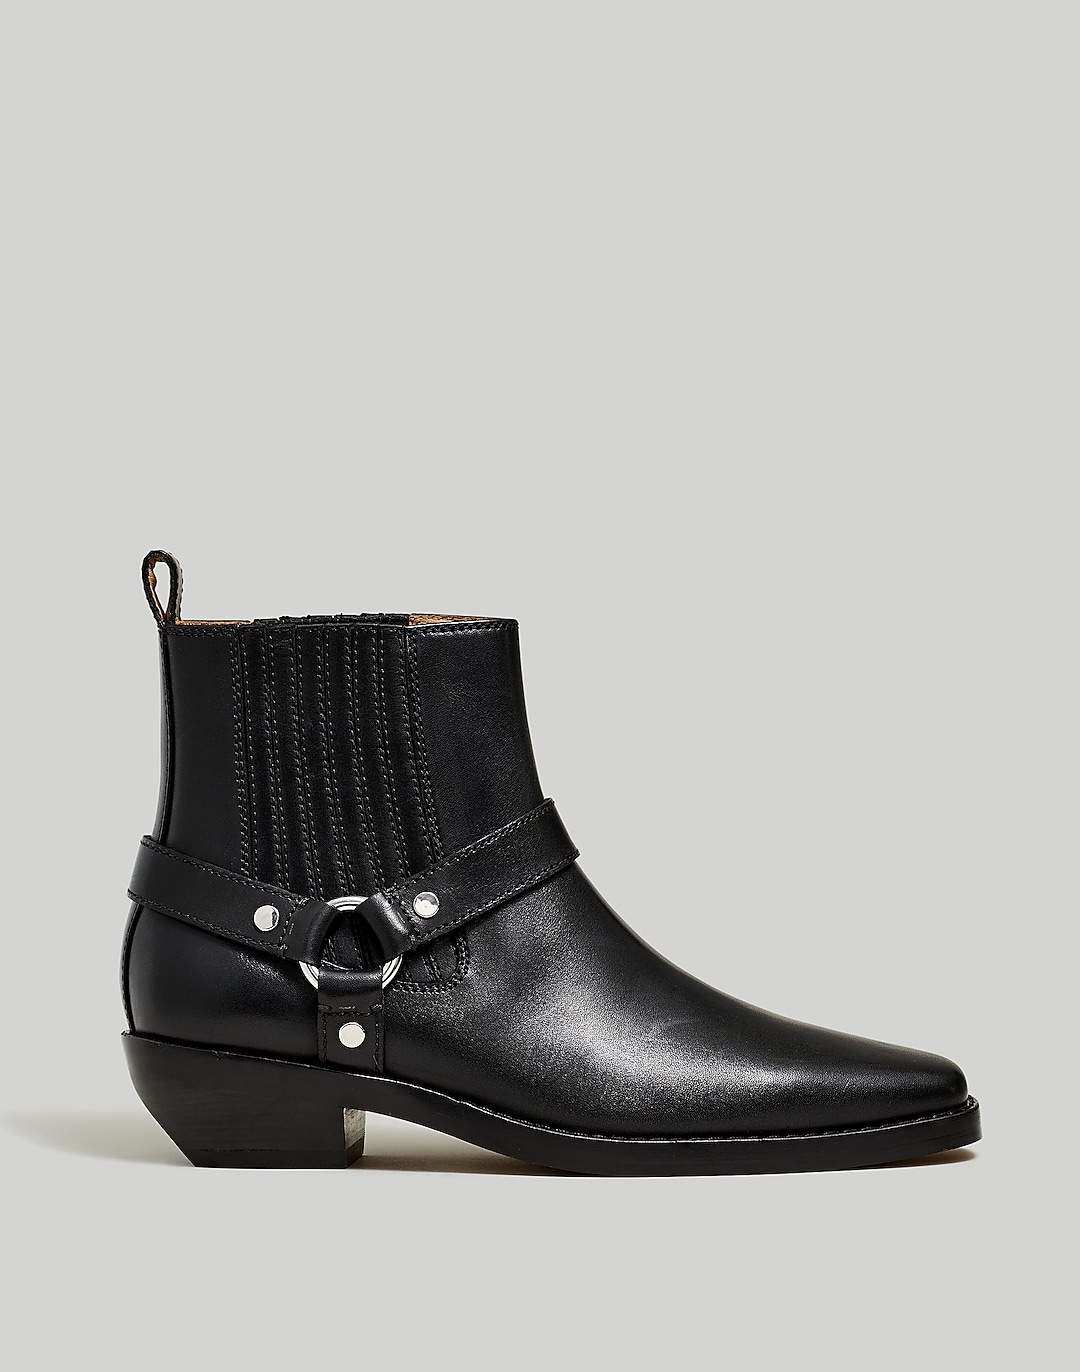 The Santiago Western Ankle Boot in Leather | Madewell